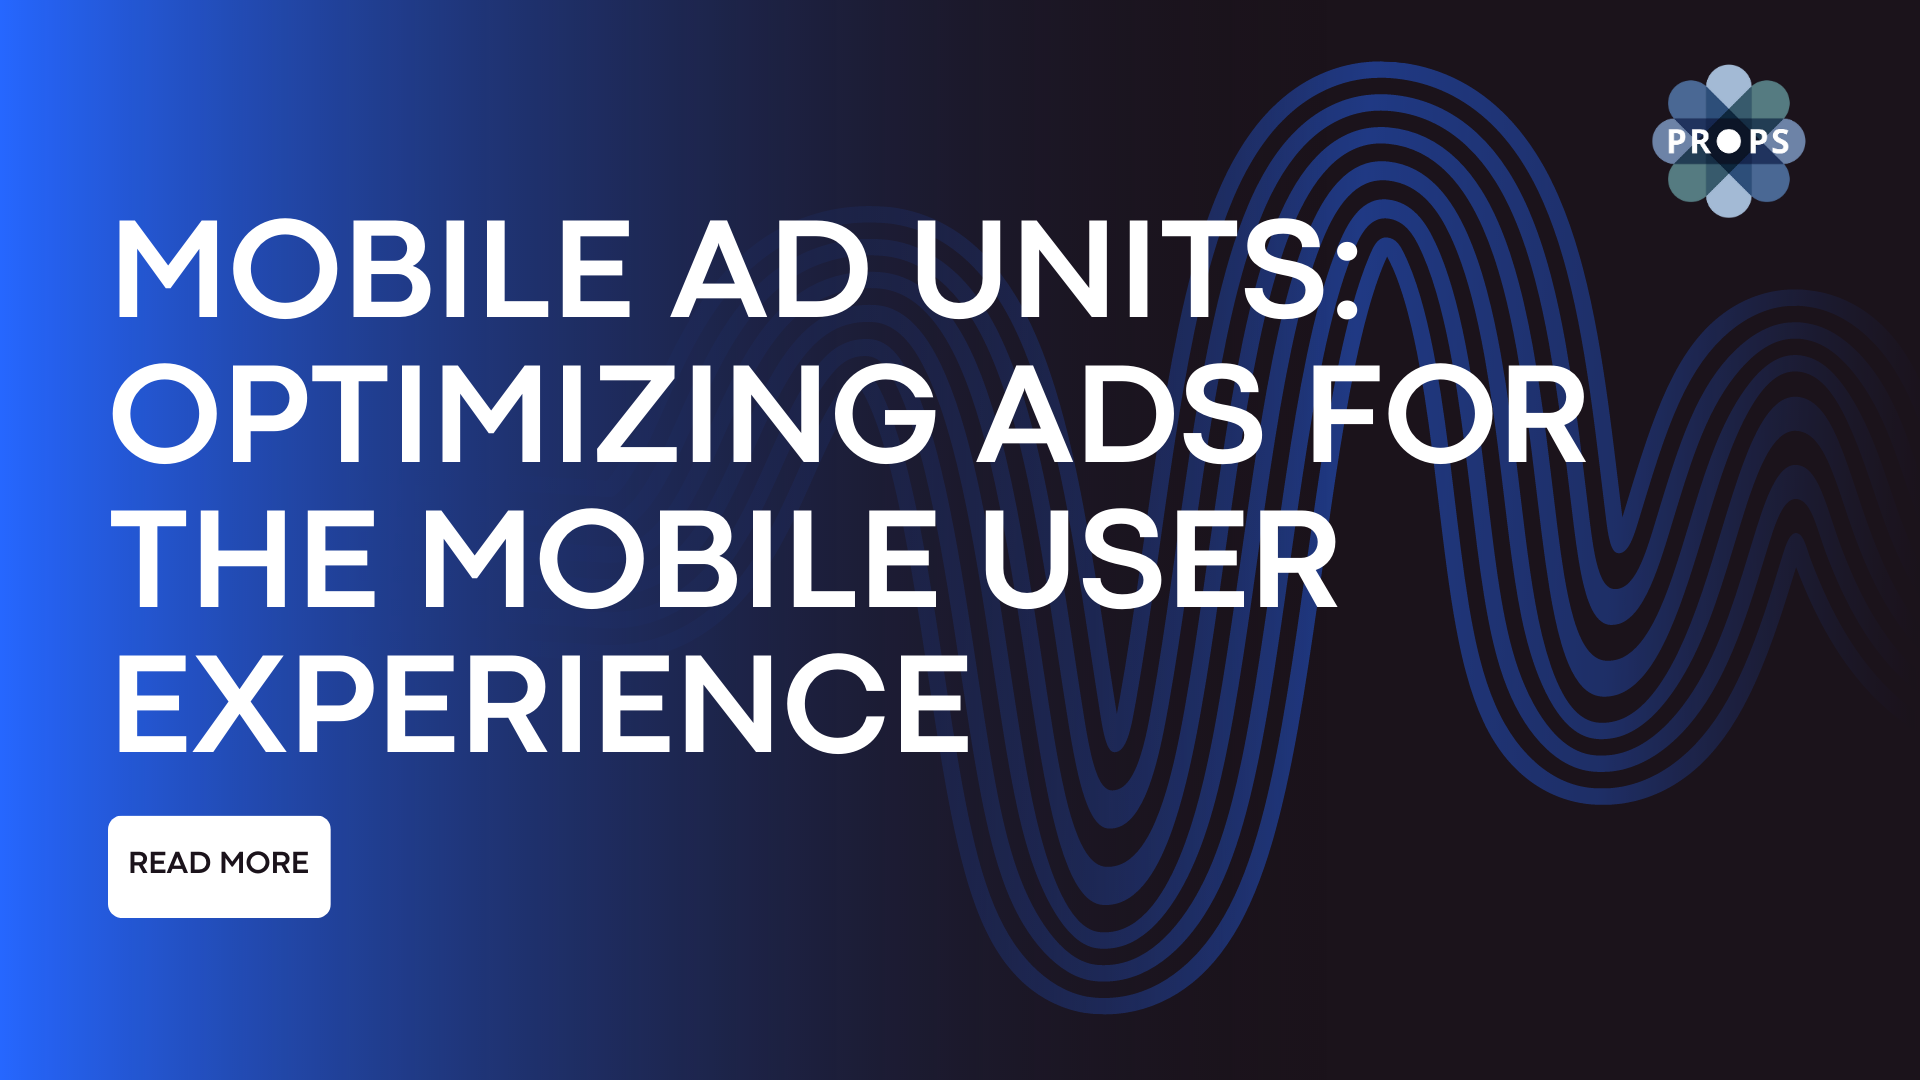 Mobile Ad Units Optimizing Ads for the Mobile User Experience